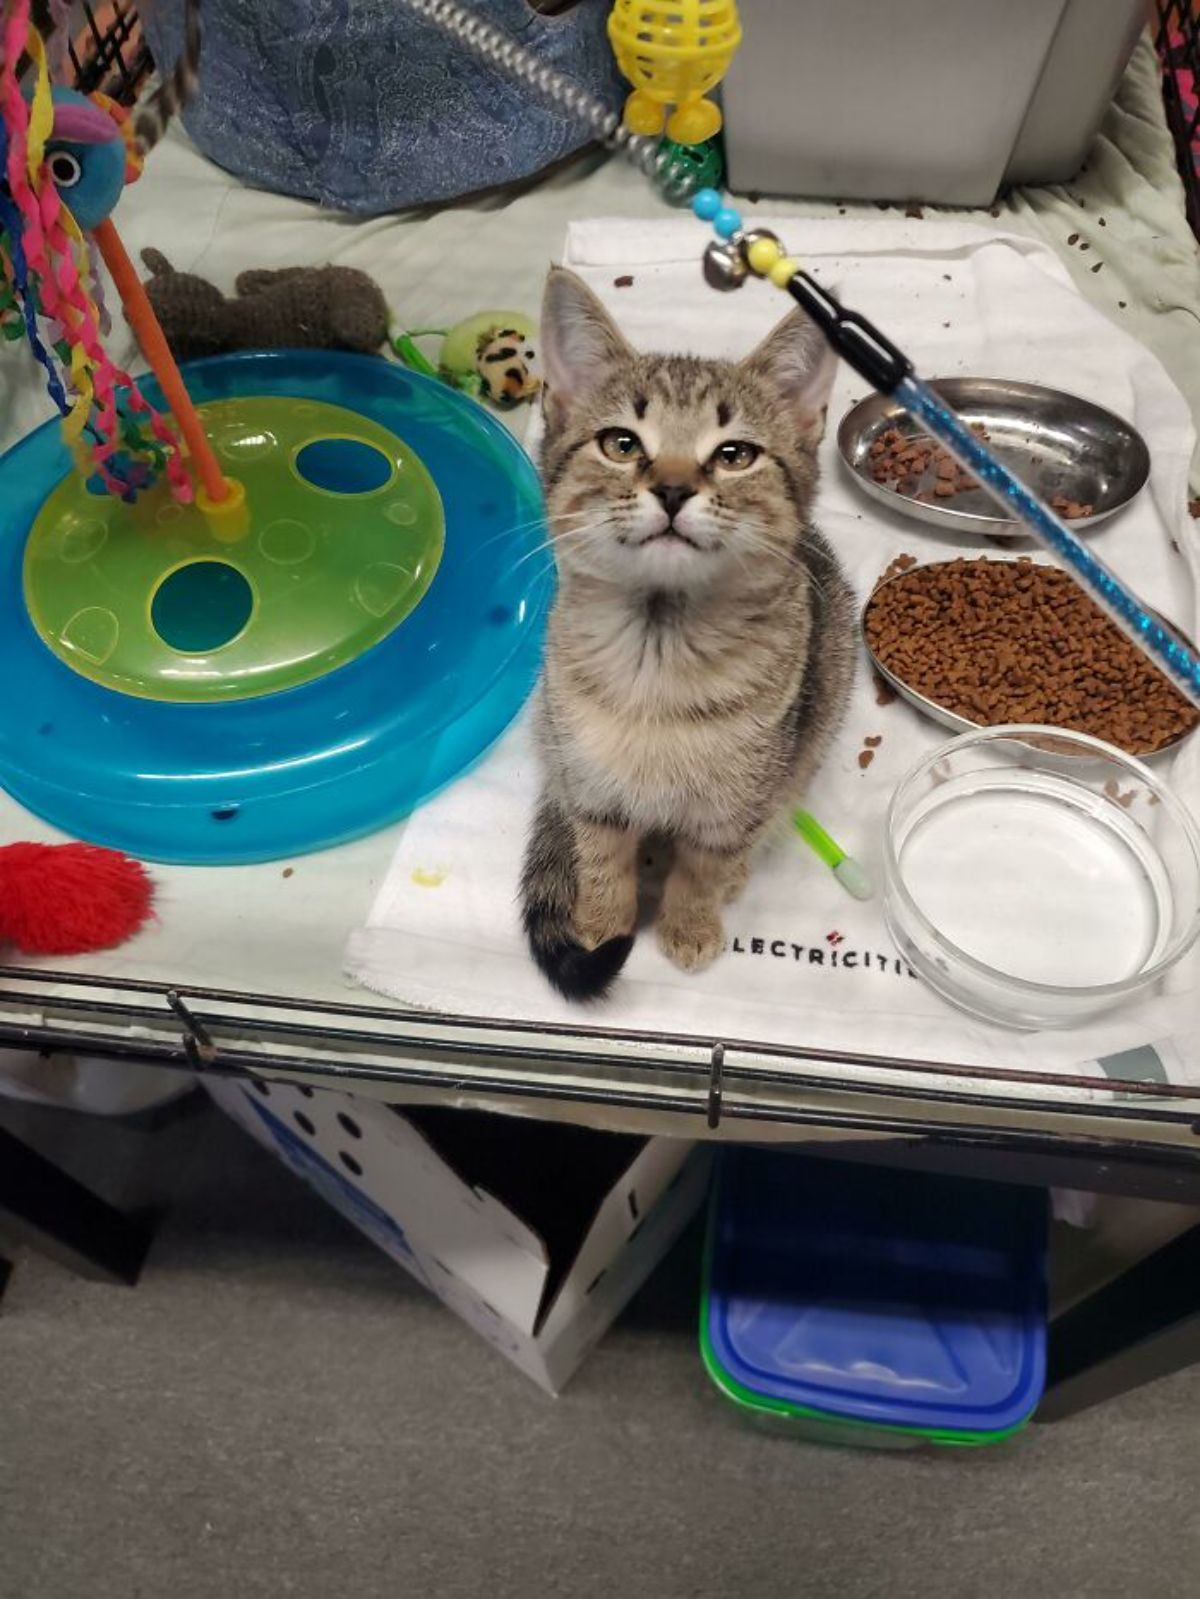 brown tabby kitten sitting on a white towel next to food and water bowls and a lot of cat toys on a table